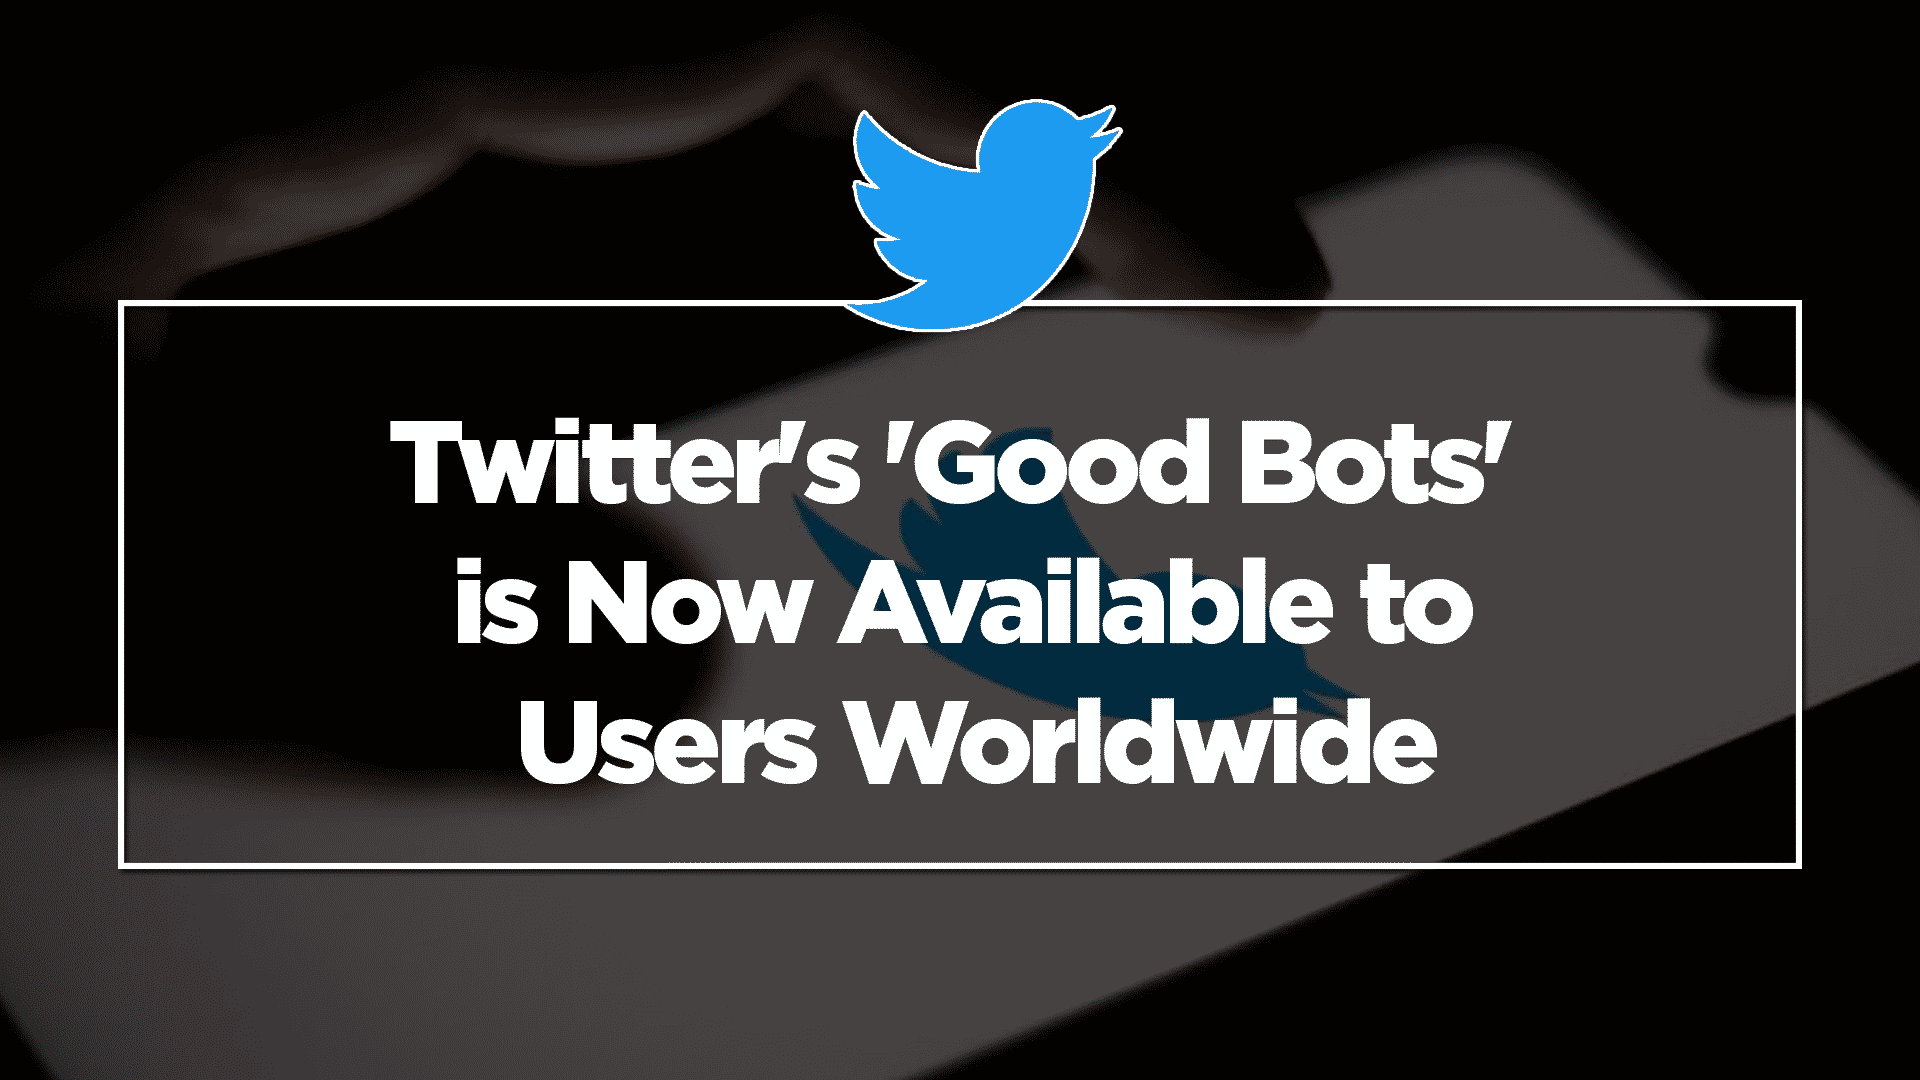 Twitter's 'Good Bots' is Now Available to Users Worldwide